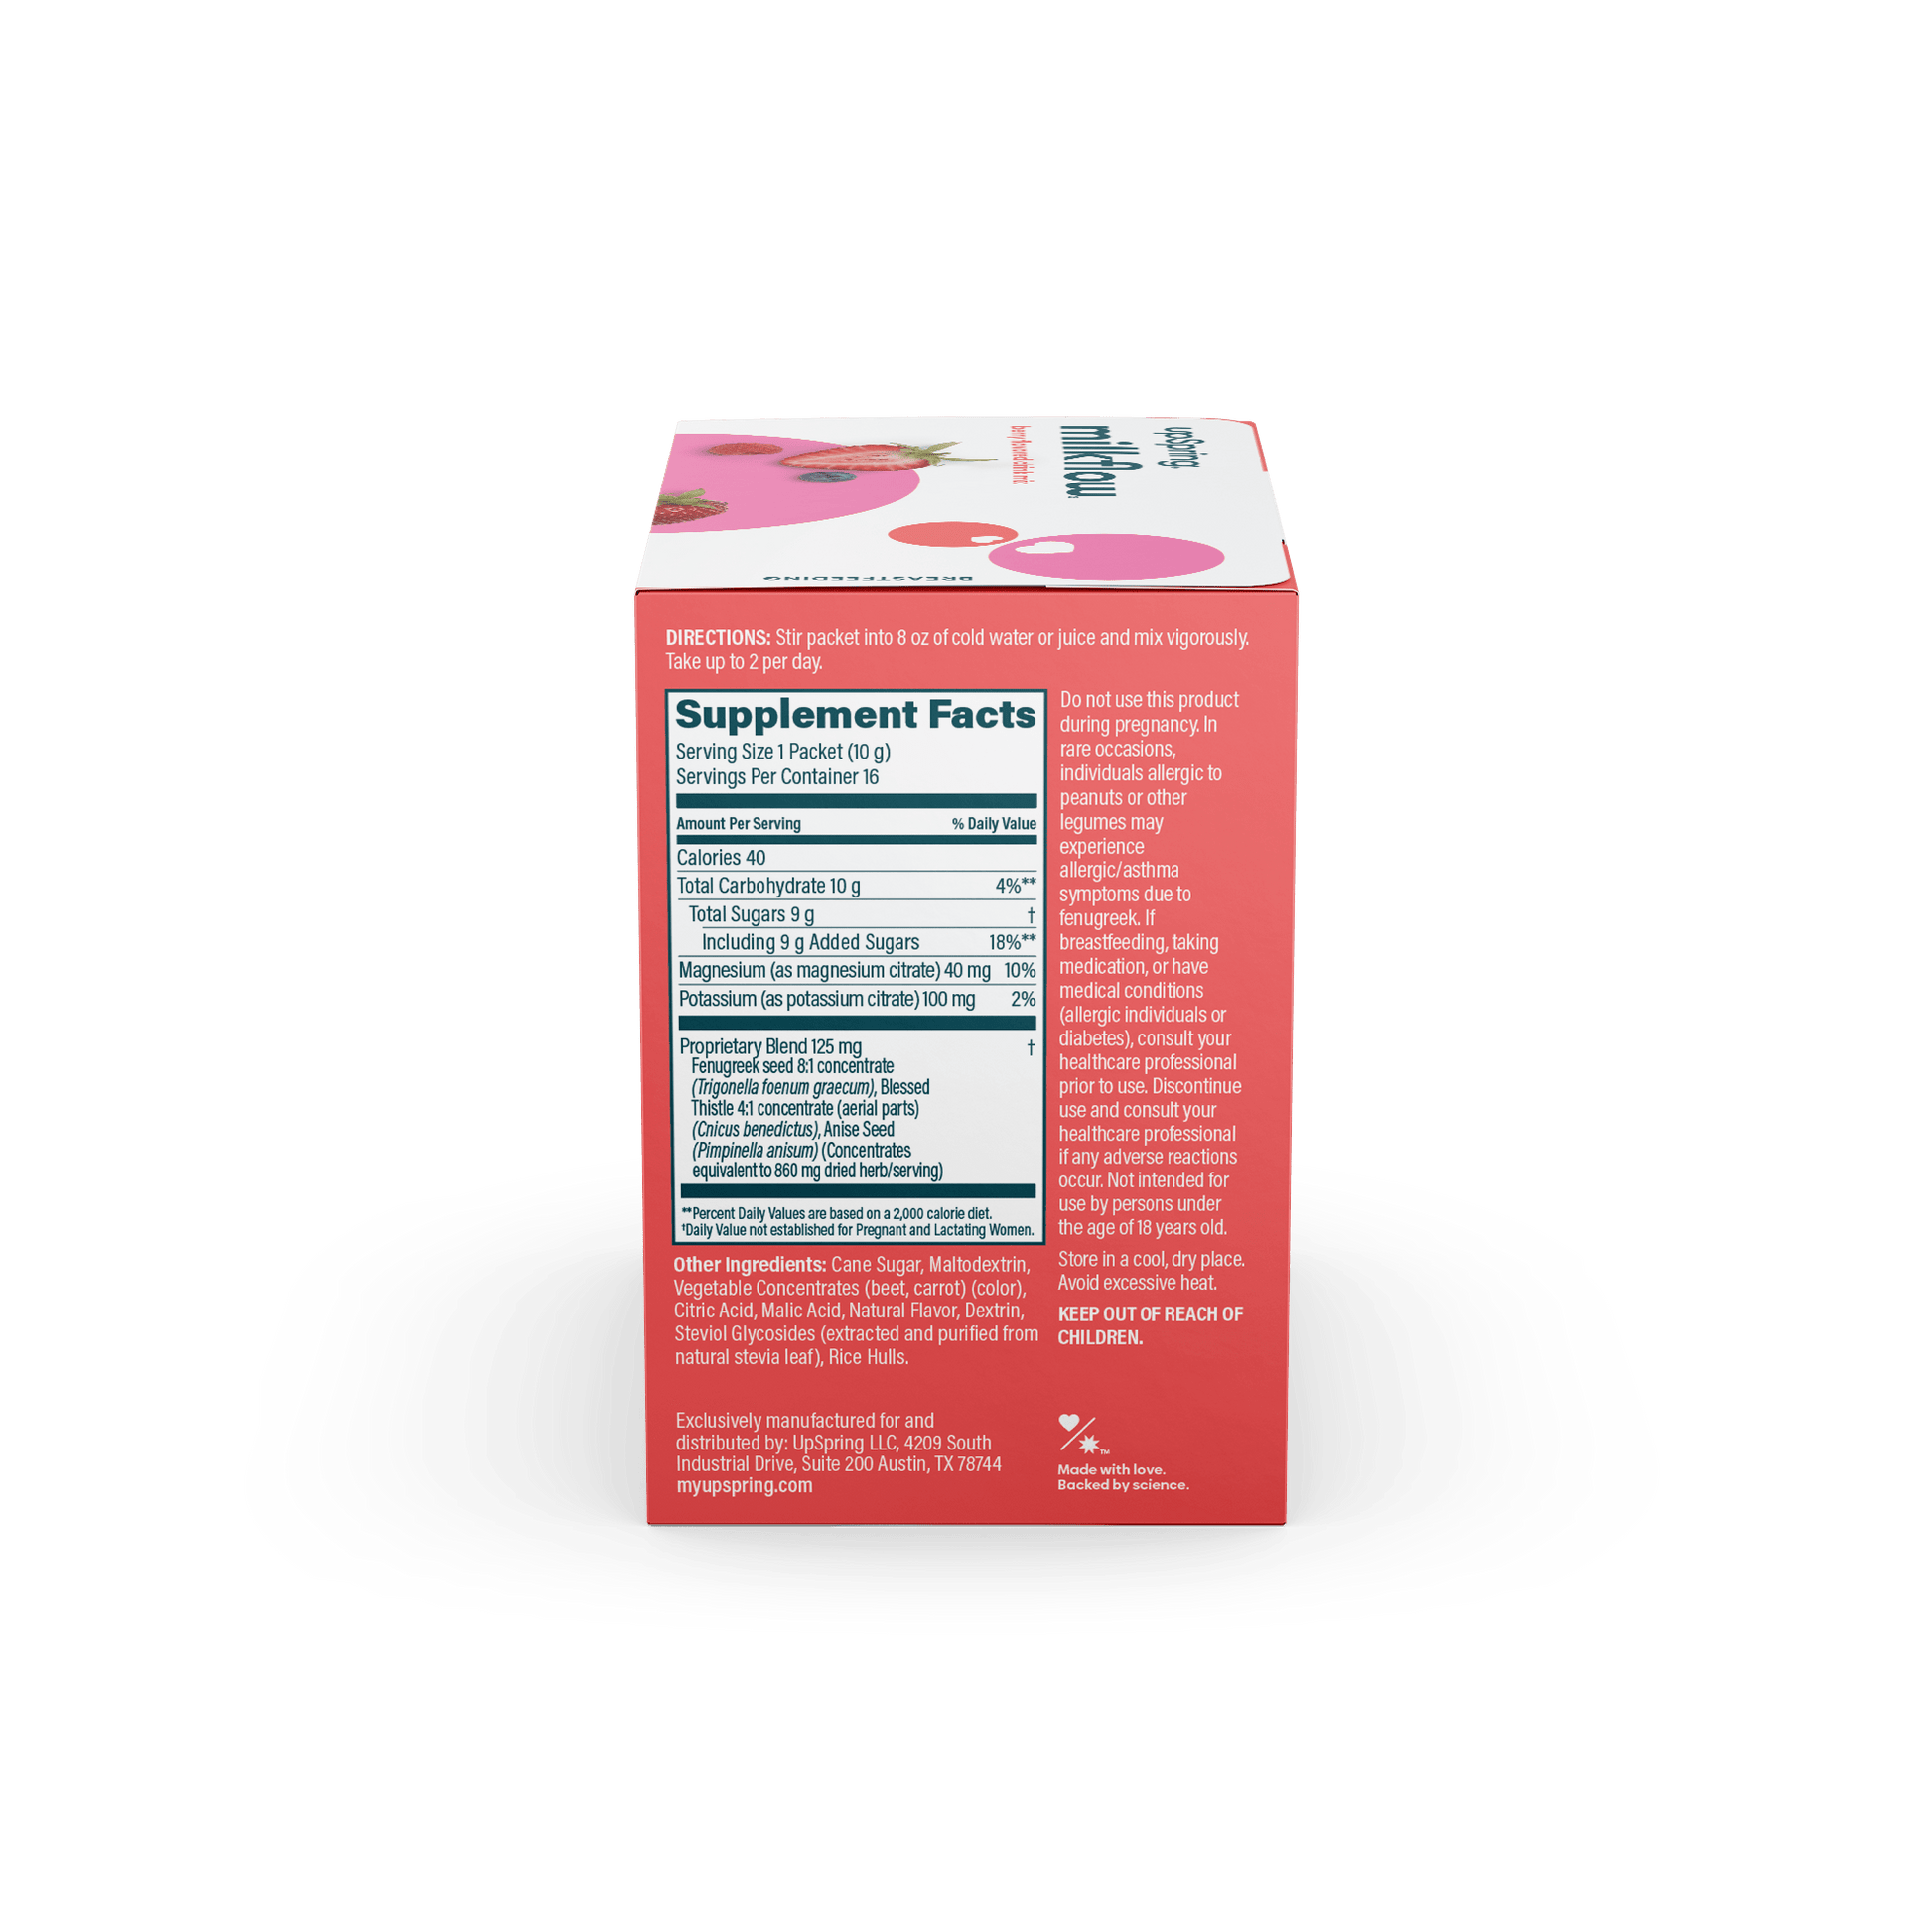 An image of the side of the box of MilkFlow Berry with facts and warnings